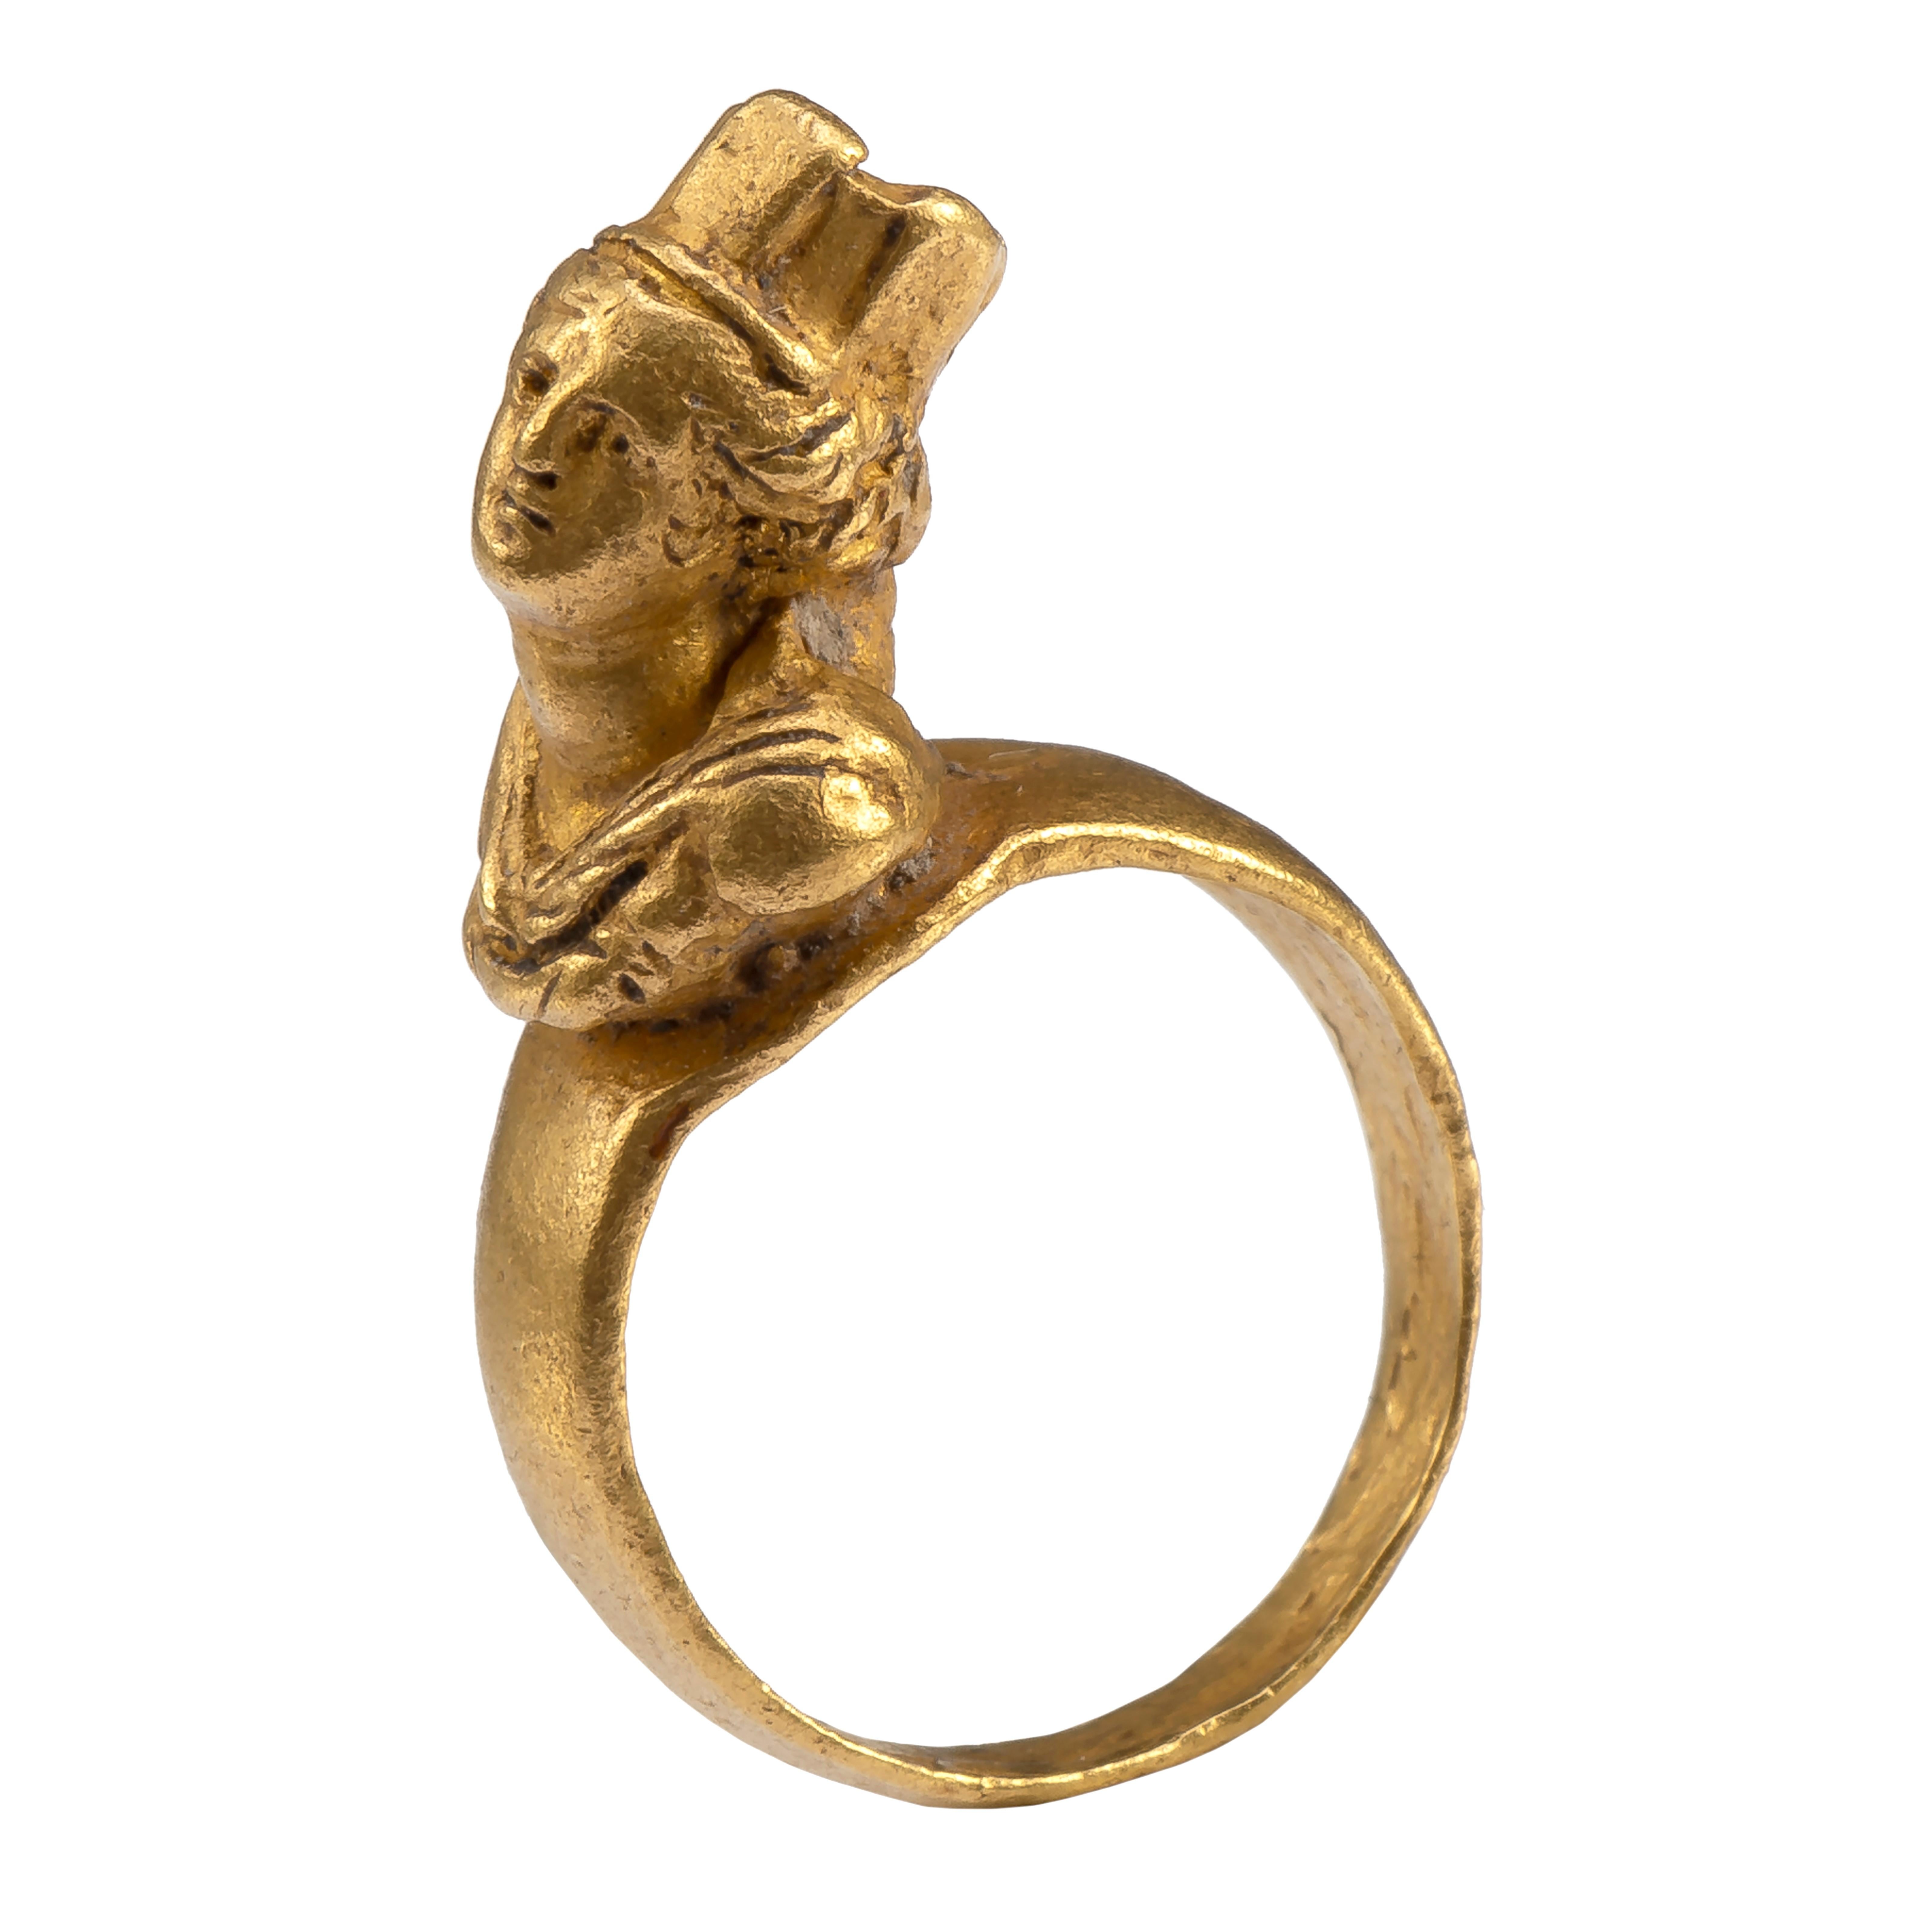 Ring with Bust of Tyche
Roman, late 1st century - 2nd Century AD
Gold
Weight 4.4 gr.; Circumference 43.45 mm.; US size 2 ¾ ; UK size E ½

Miniature sculpture in ring form of the Greek goddess of fortune and luck. This glorious ring is